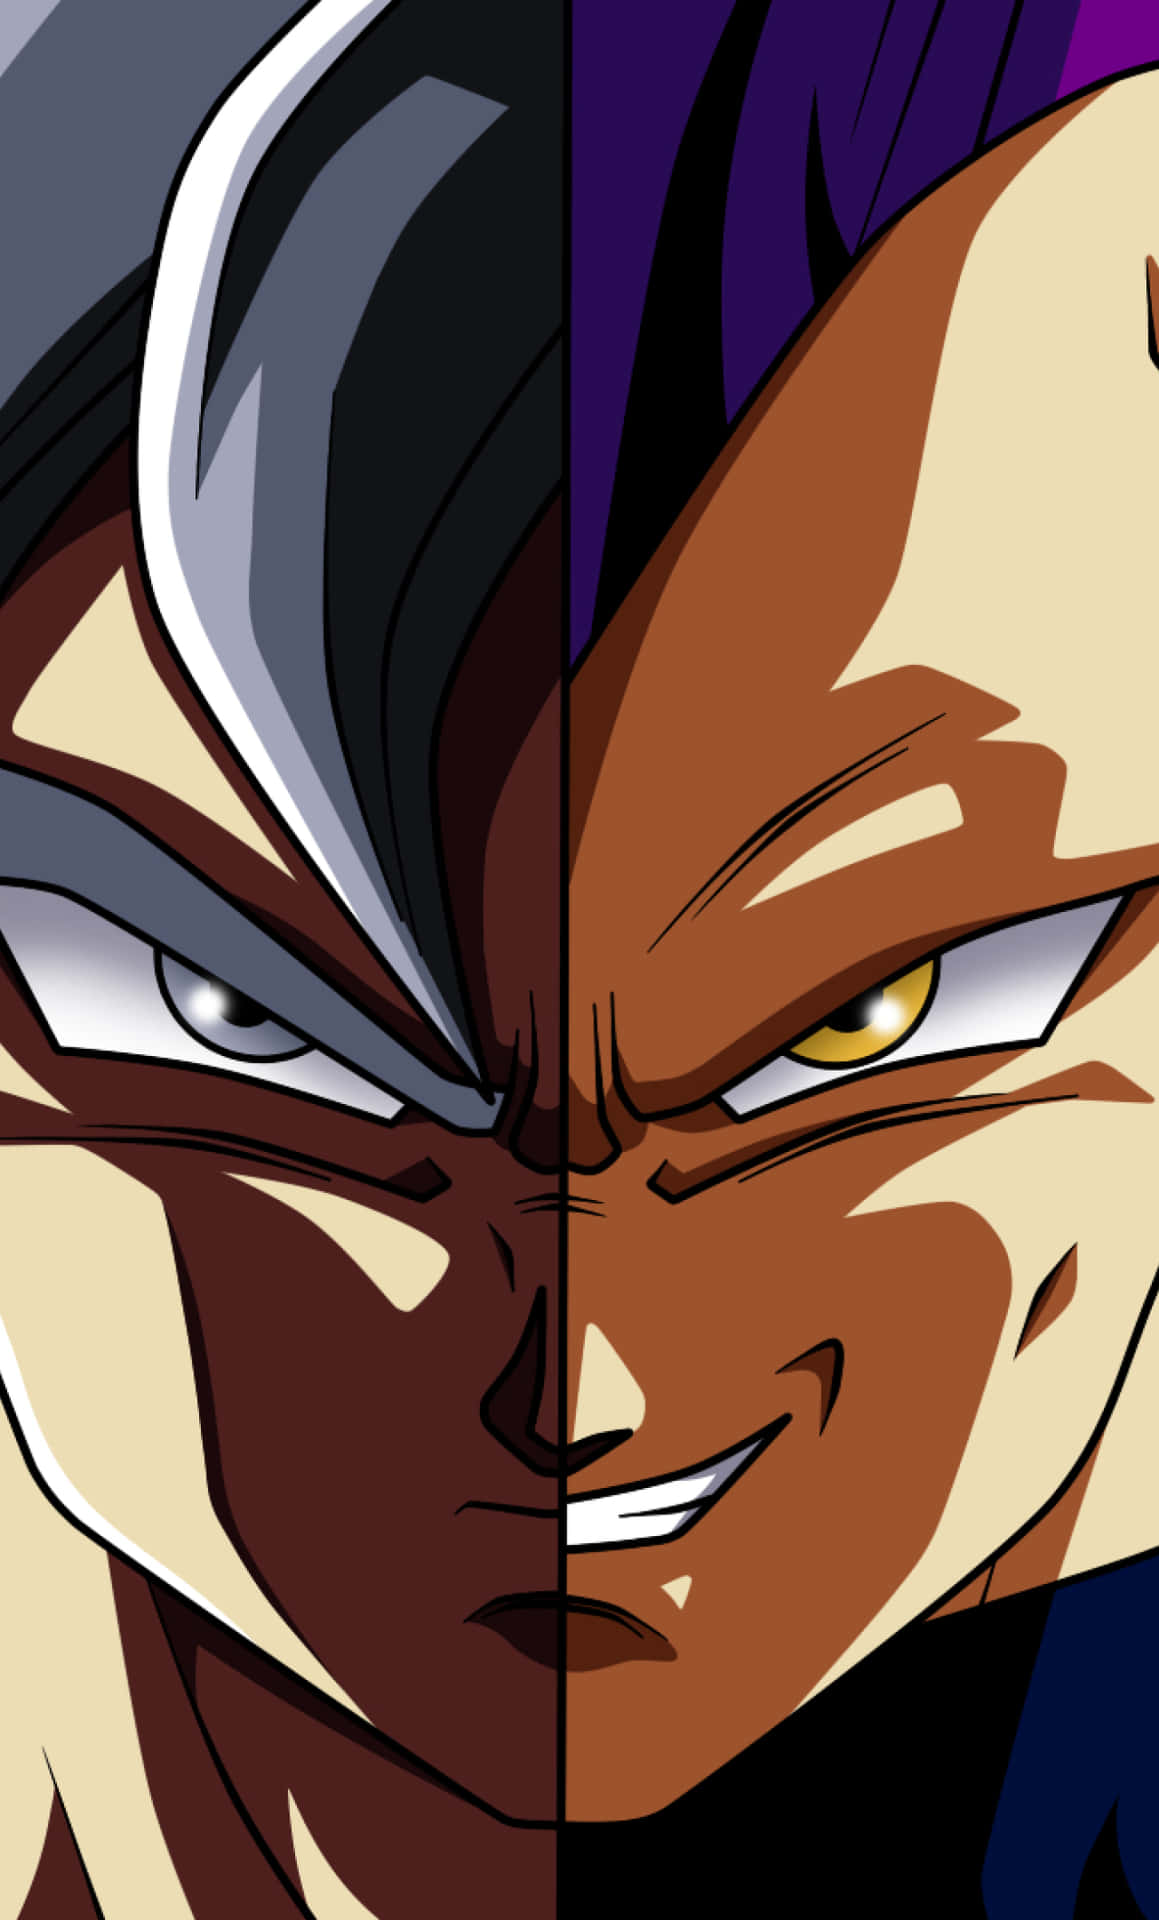 Fans of Dragon Ball rejoice as Goku and Vegeta finally come together in a unique iPhone design. Wallpaper